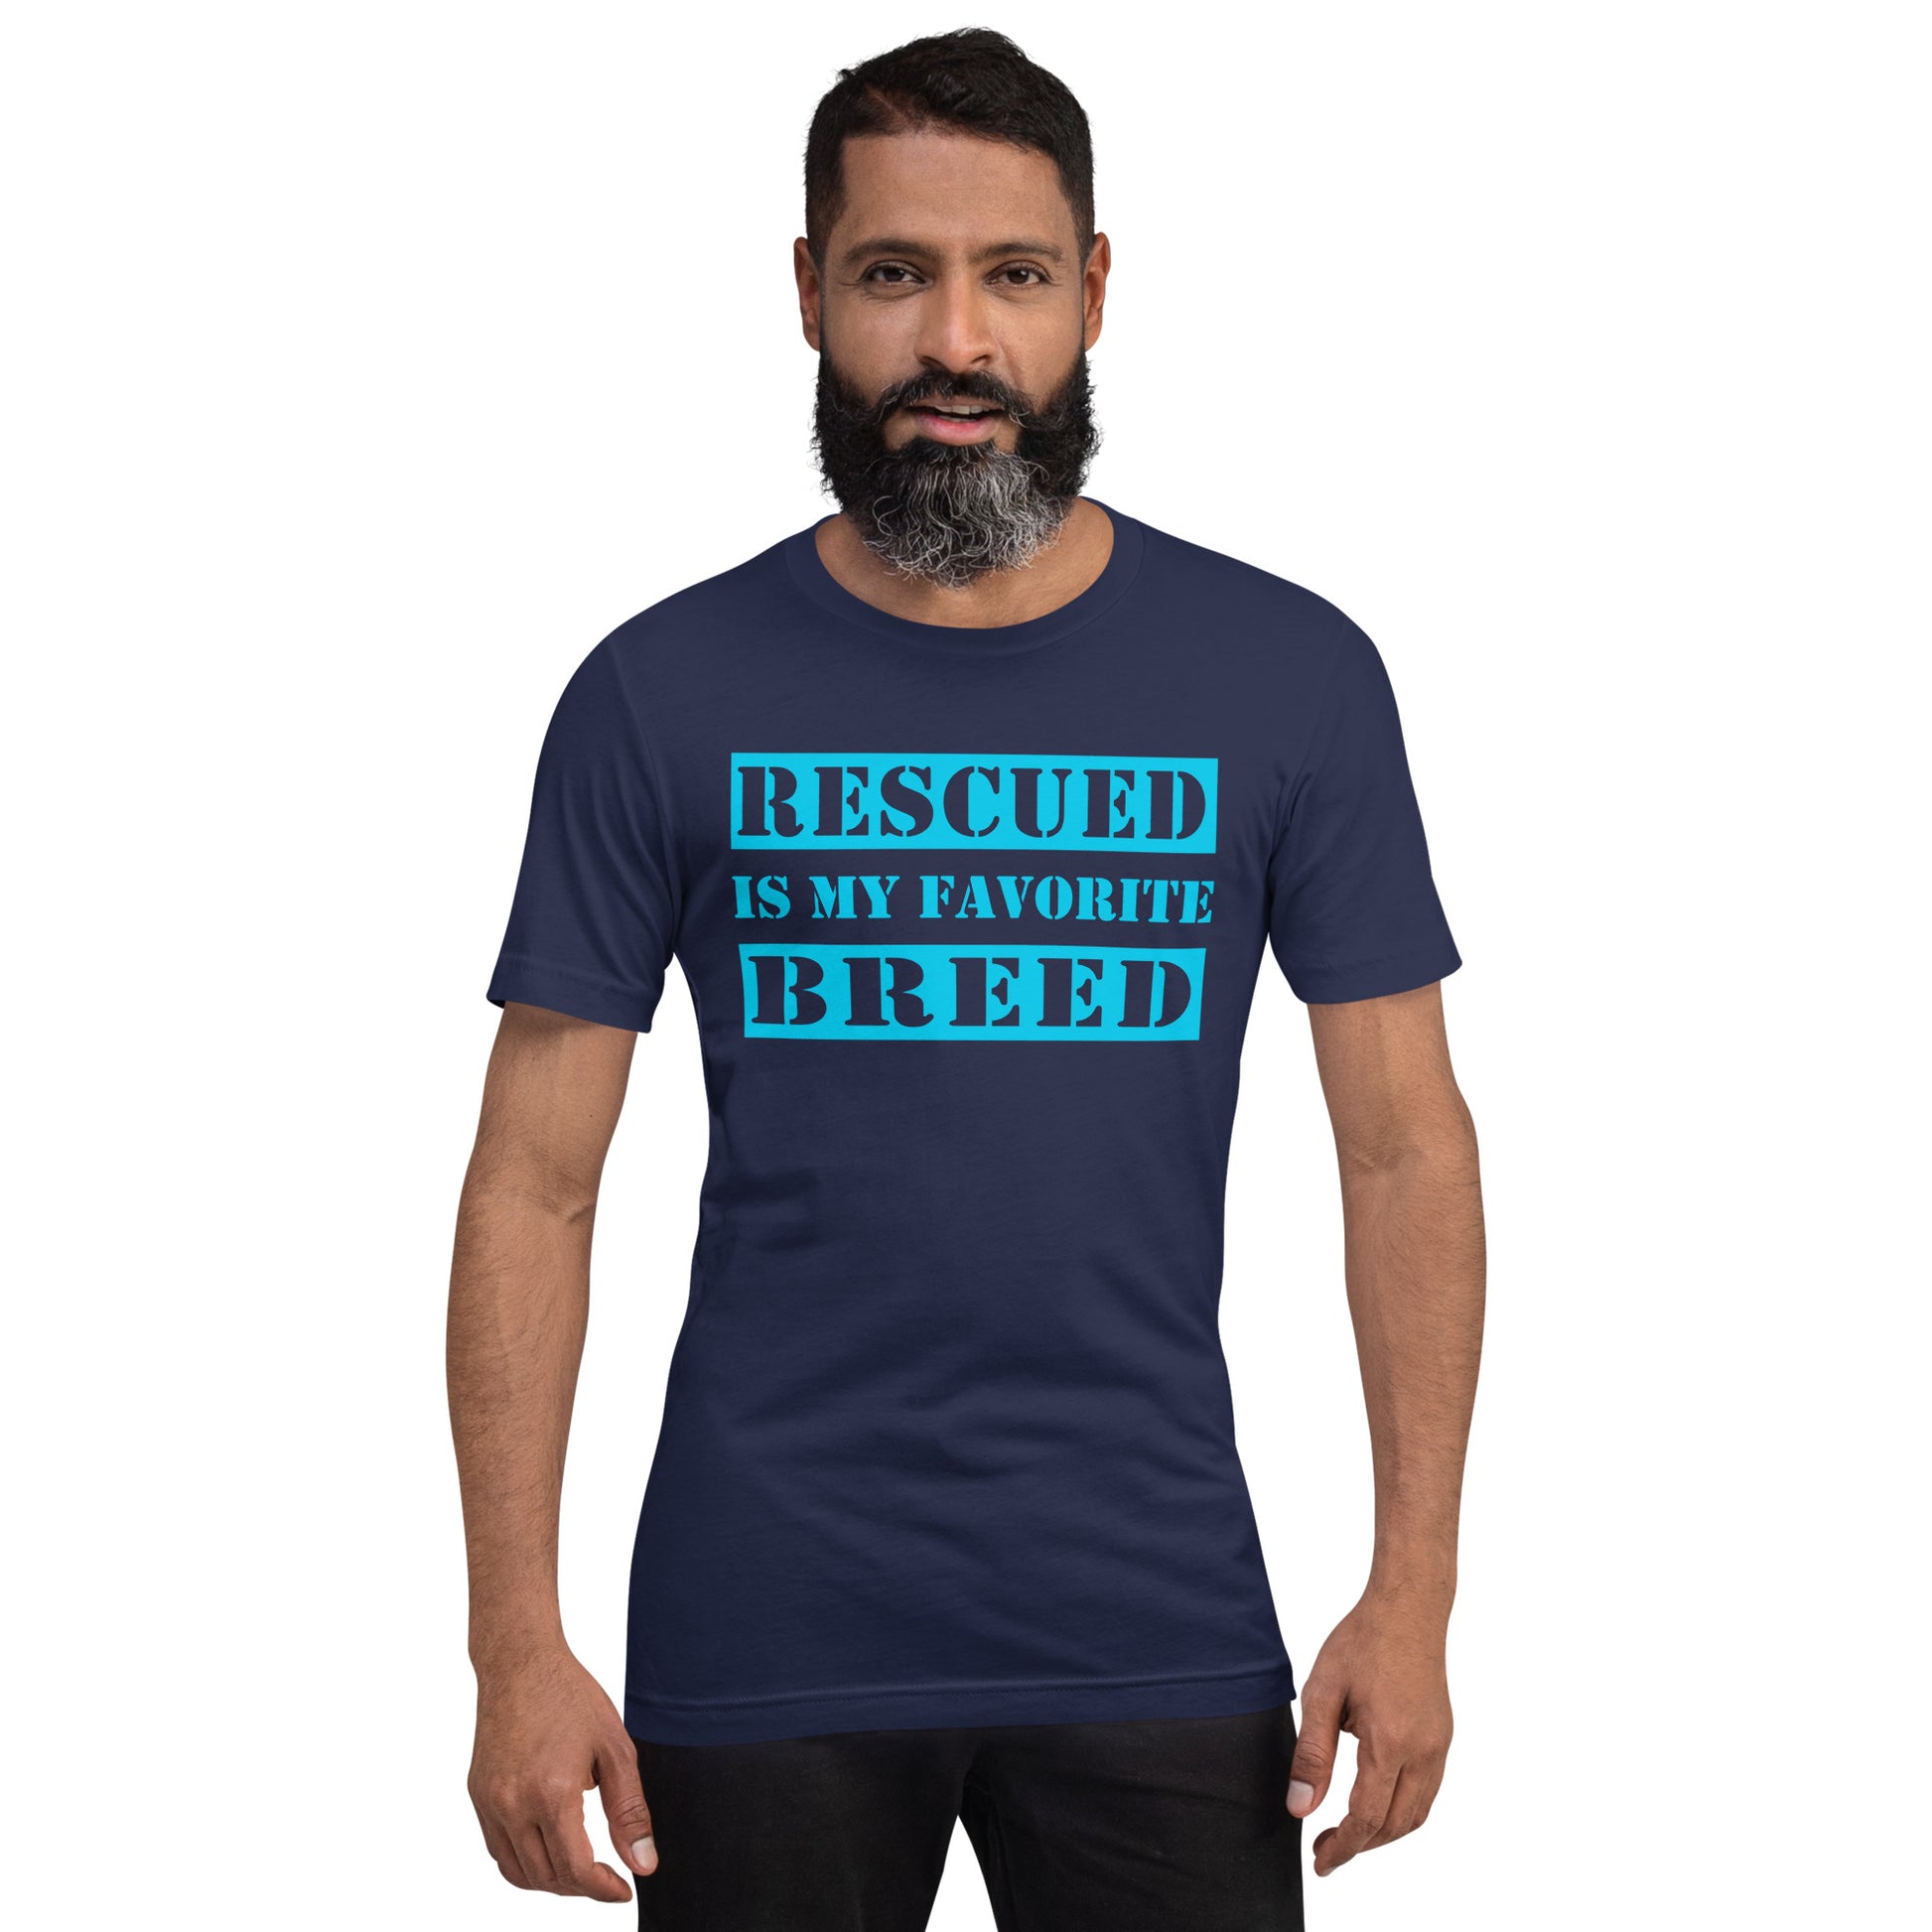 Rescued Is My Favorite Breed Unisex Black T-Shirt Designed by Dog Artistry.